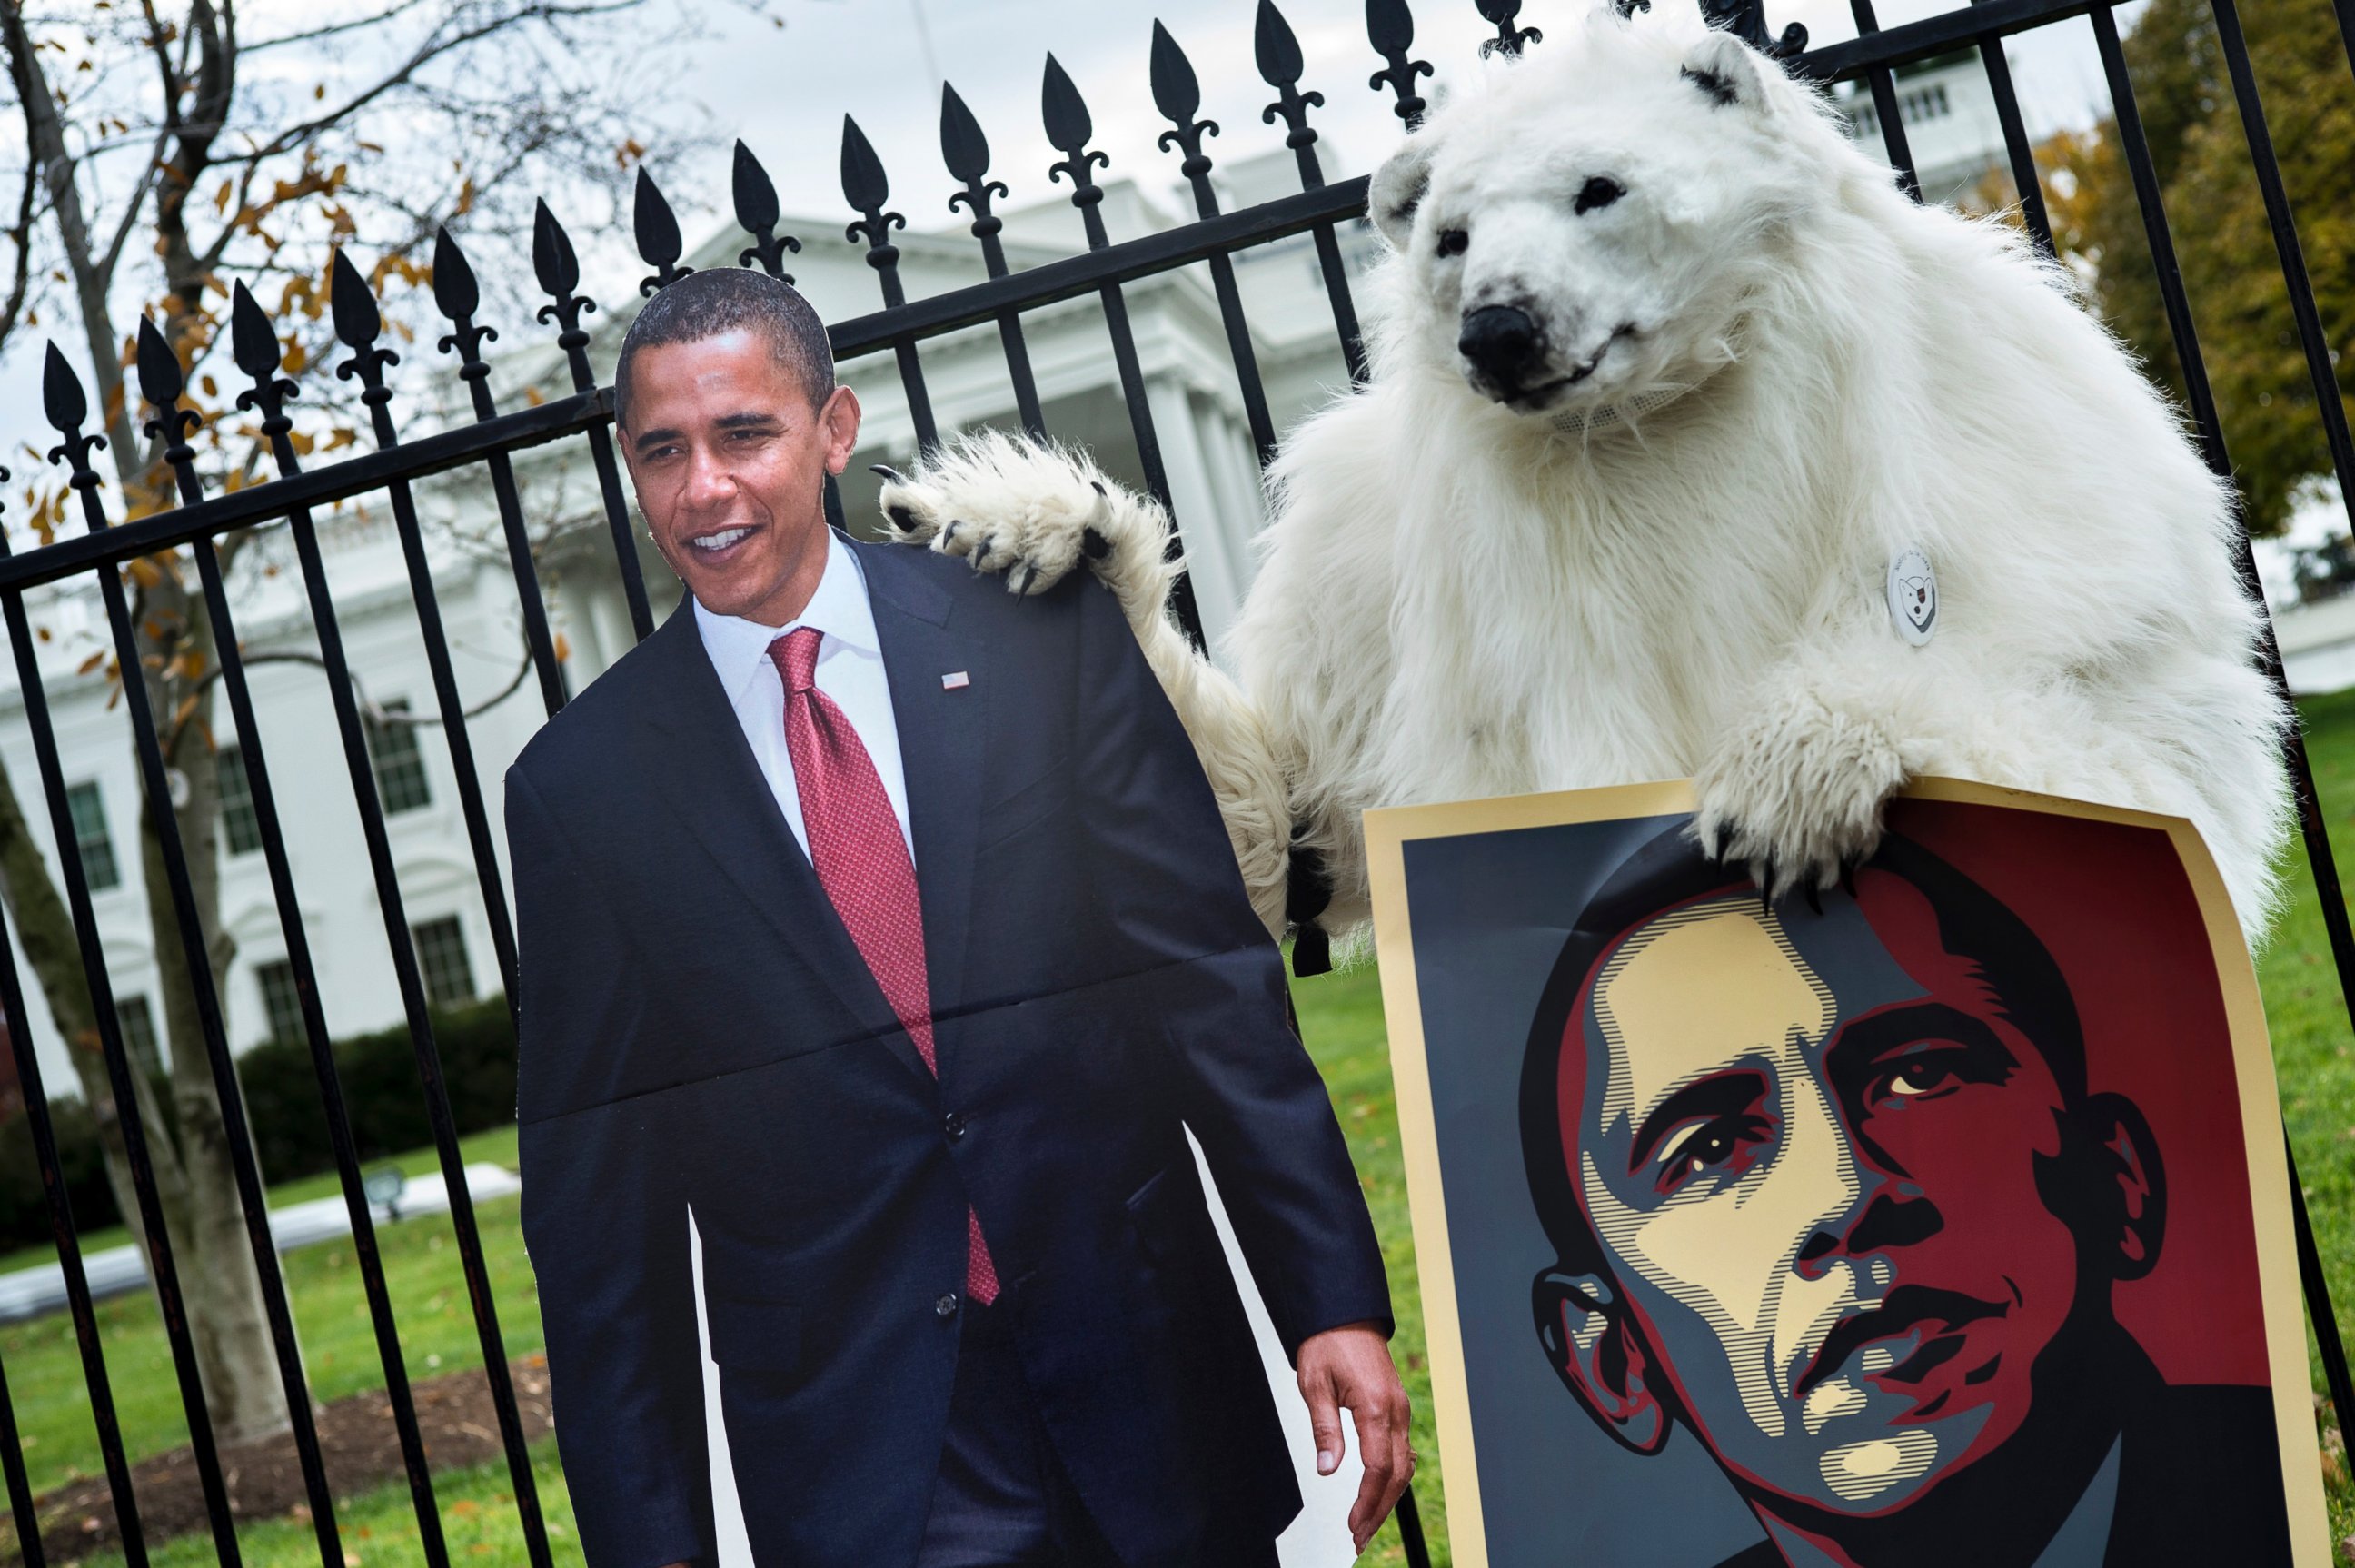 PHOTO: A protester dressed as a polar bear stands outside the White House grounds with posters on Pennsylvania Avenue Nov. 22, 2013 in Washington, DC.